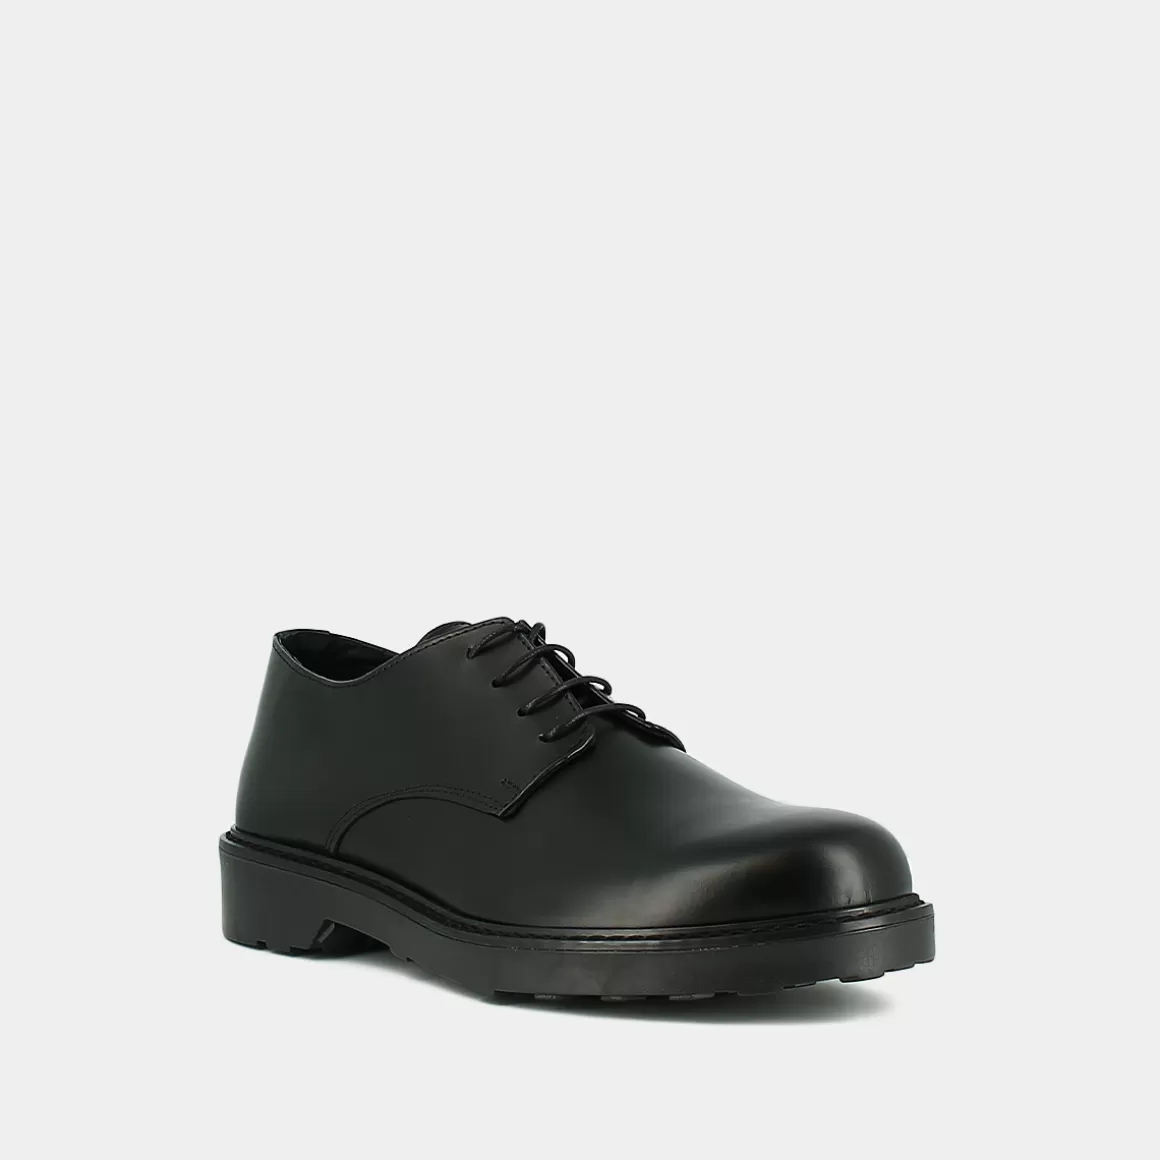 Derbies with laces and notched soles<Jonak Flash Sale